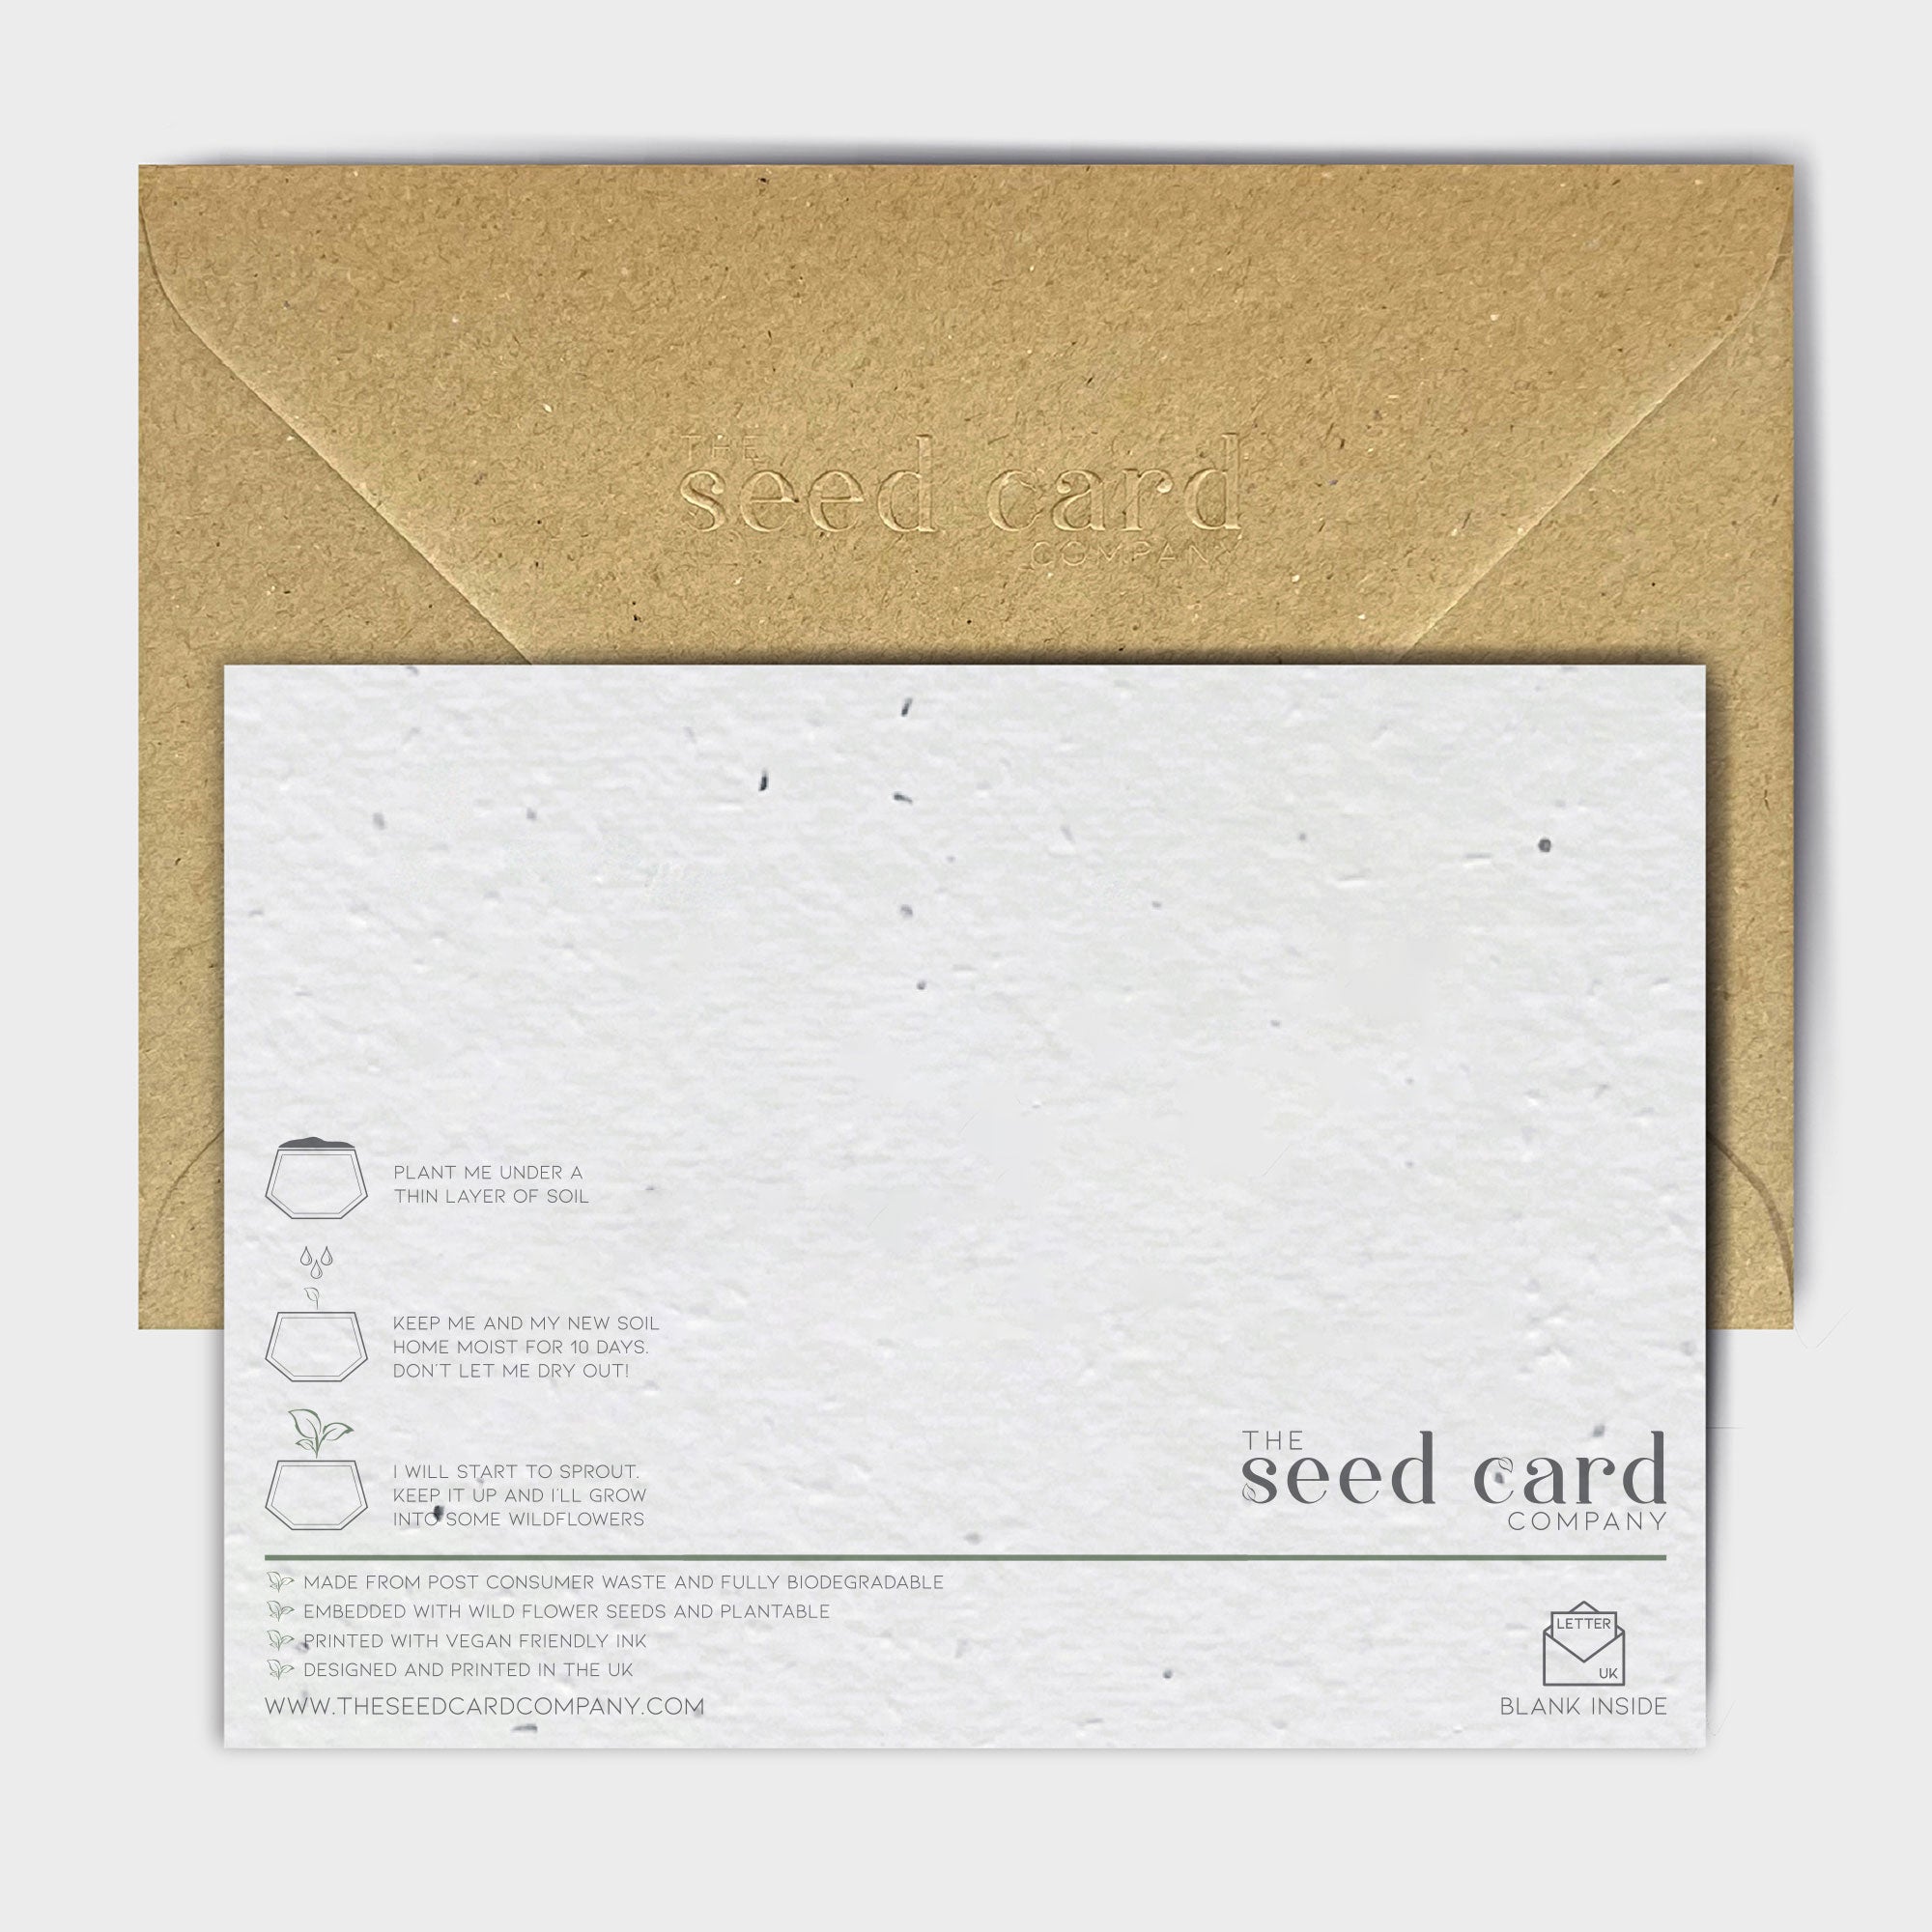 Shop online When Life Gives You Lemons - 100% biodegradable seed-embedded cards Shop -The Seed Card Company